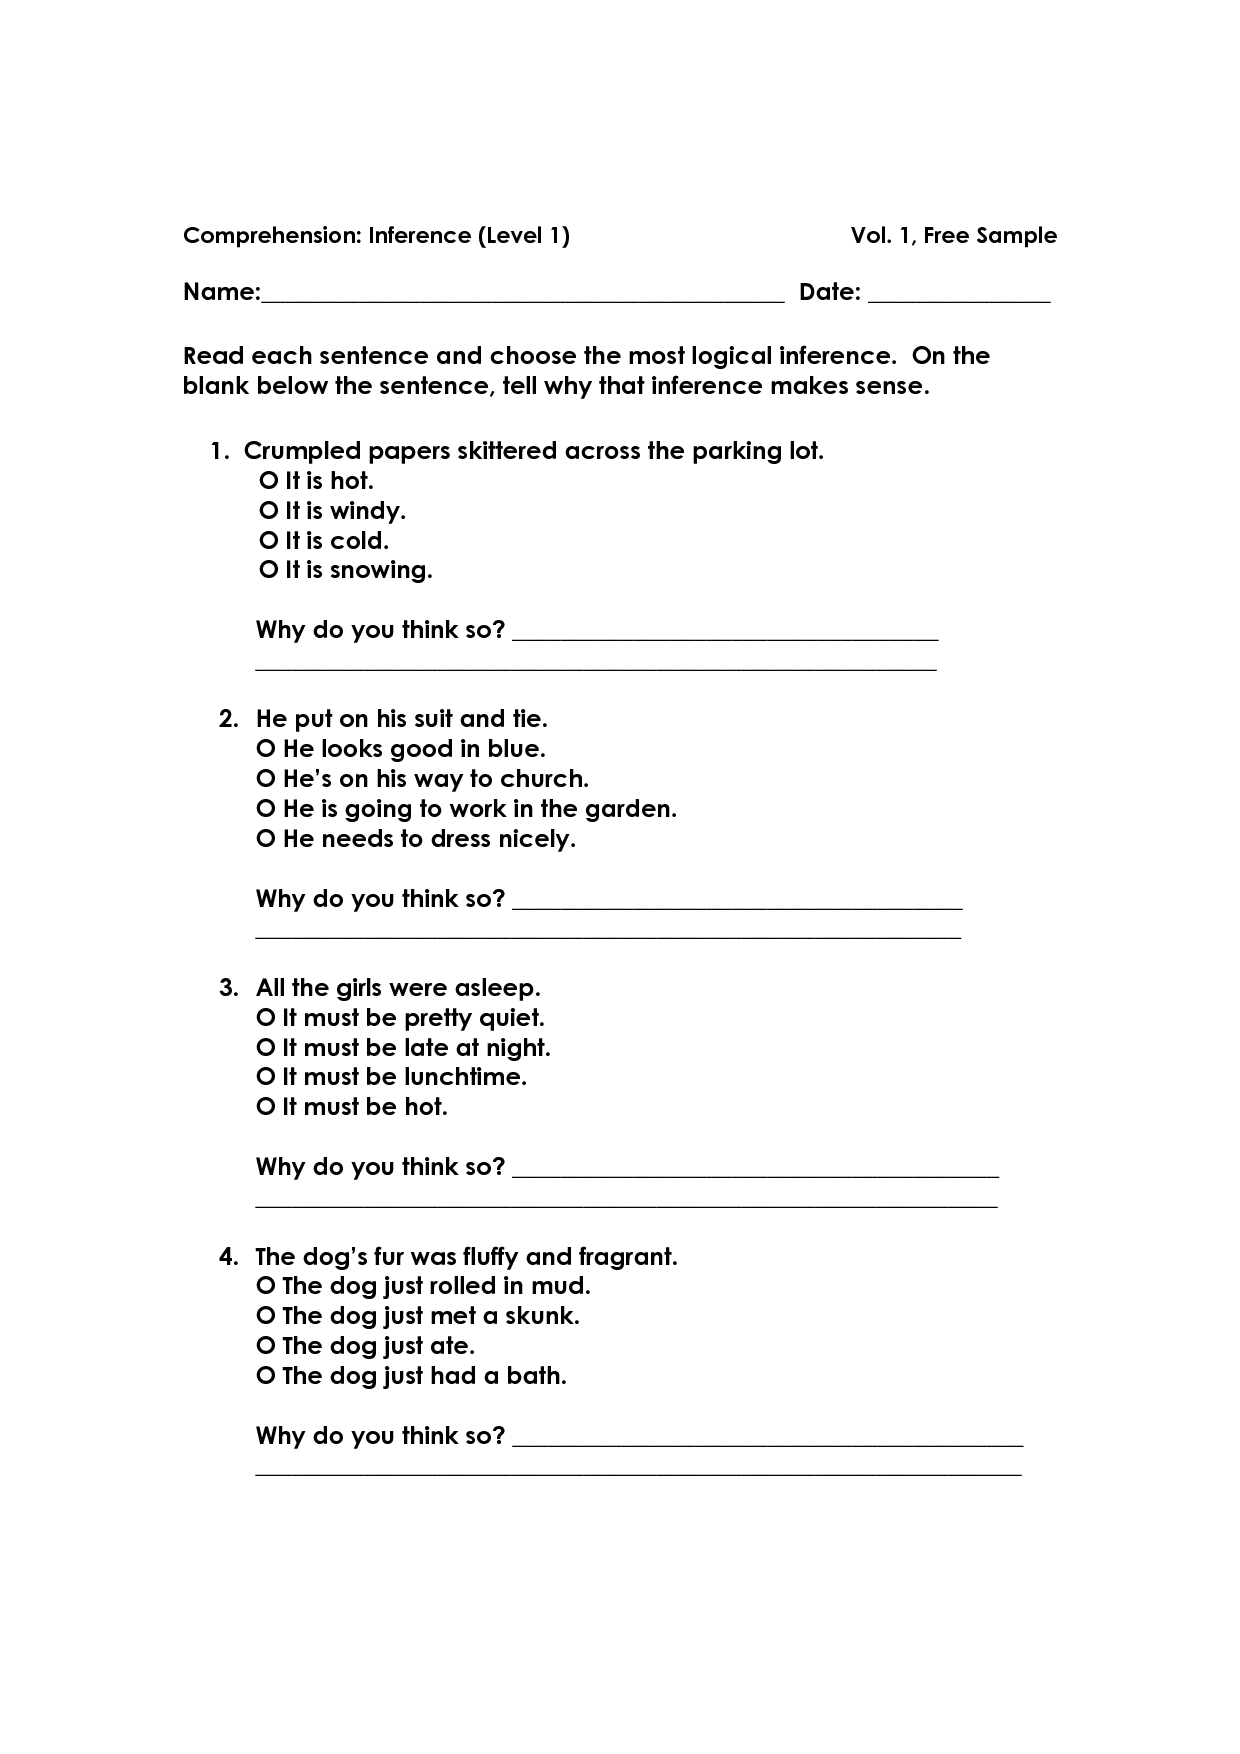 13-best-images-of-inferences-worksheets-with-answers-inference